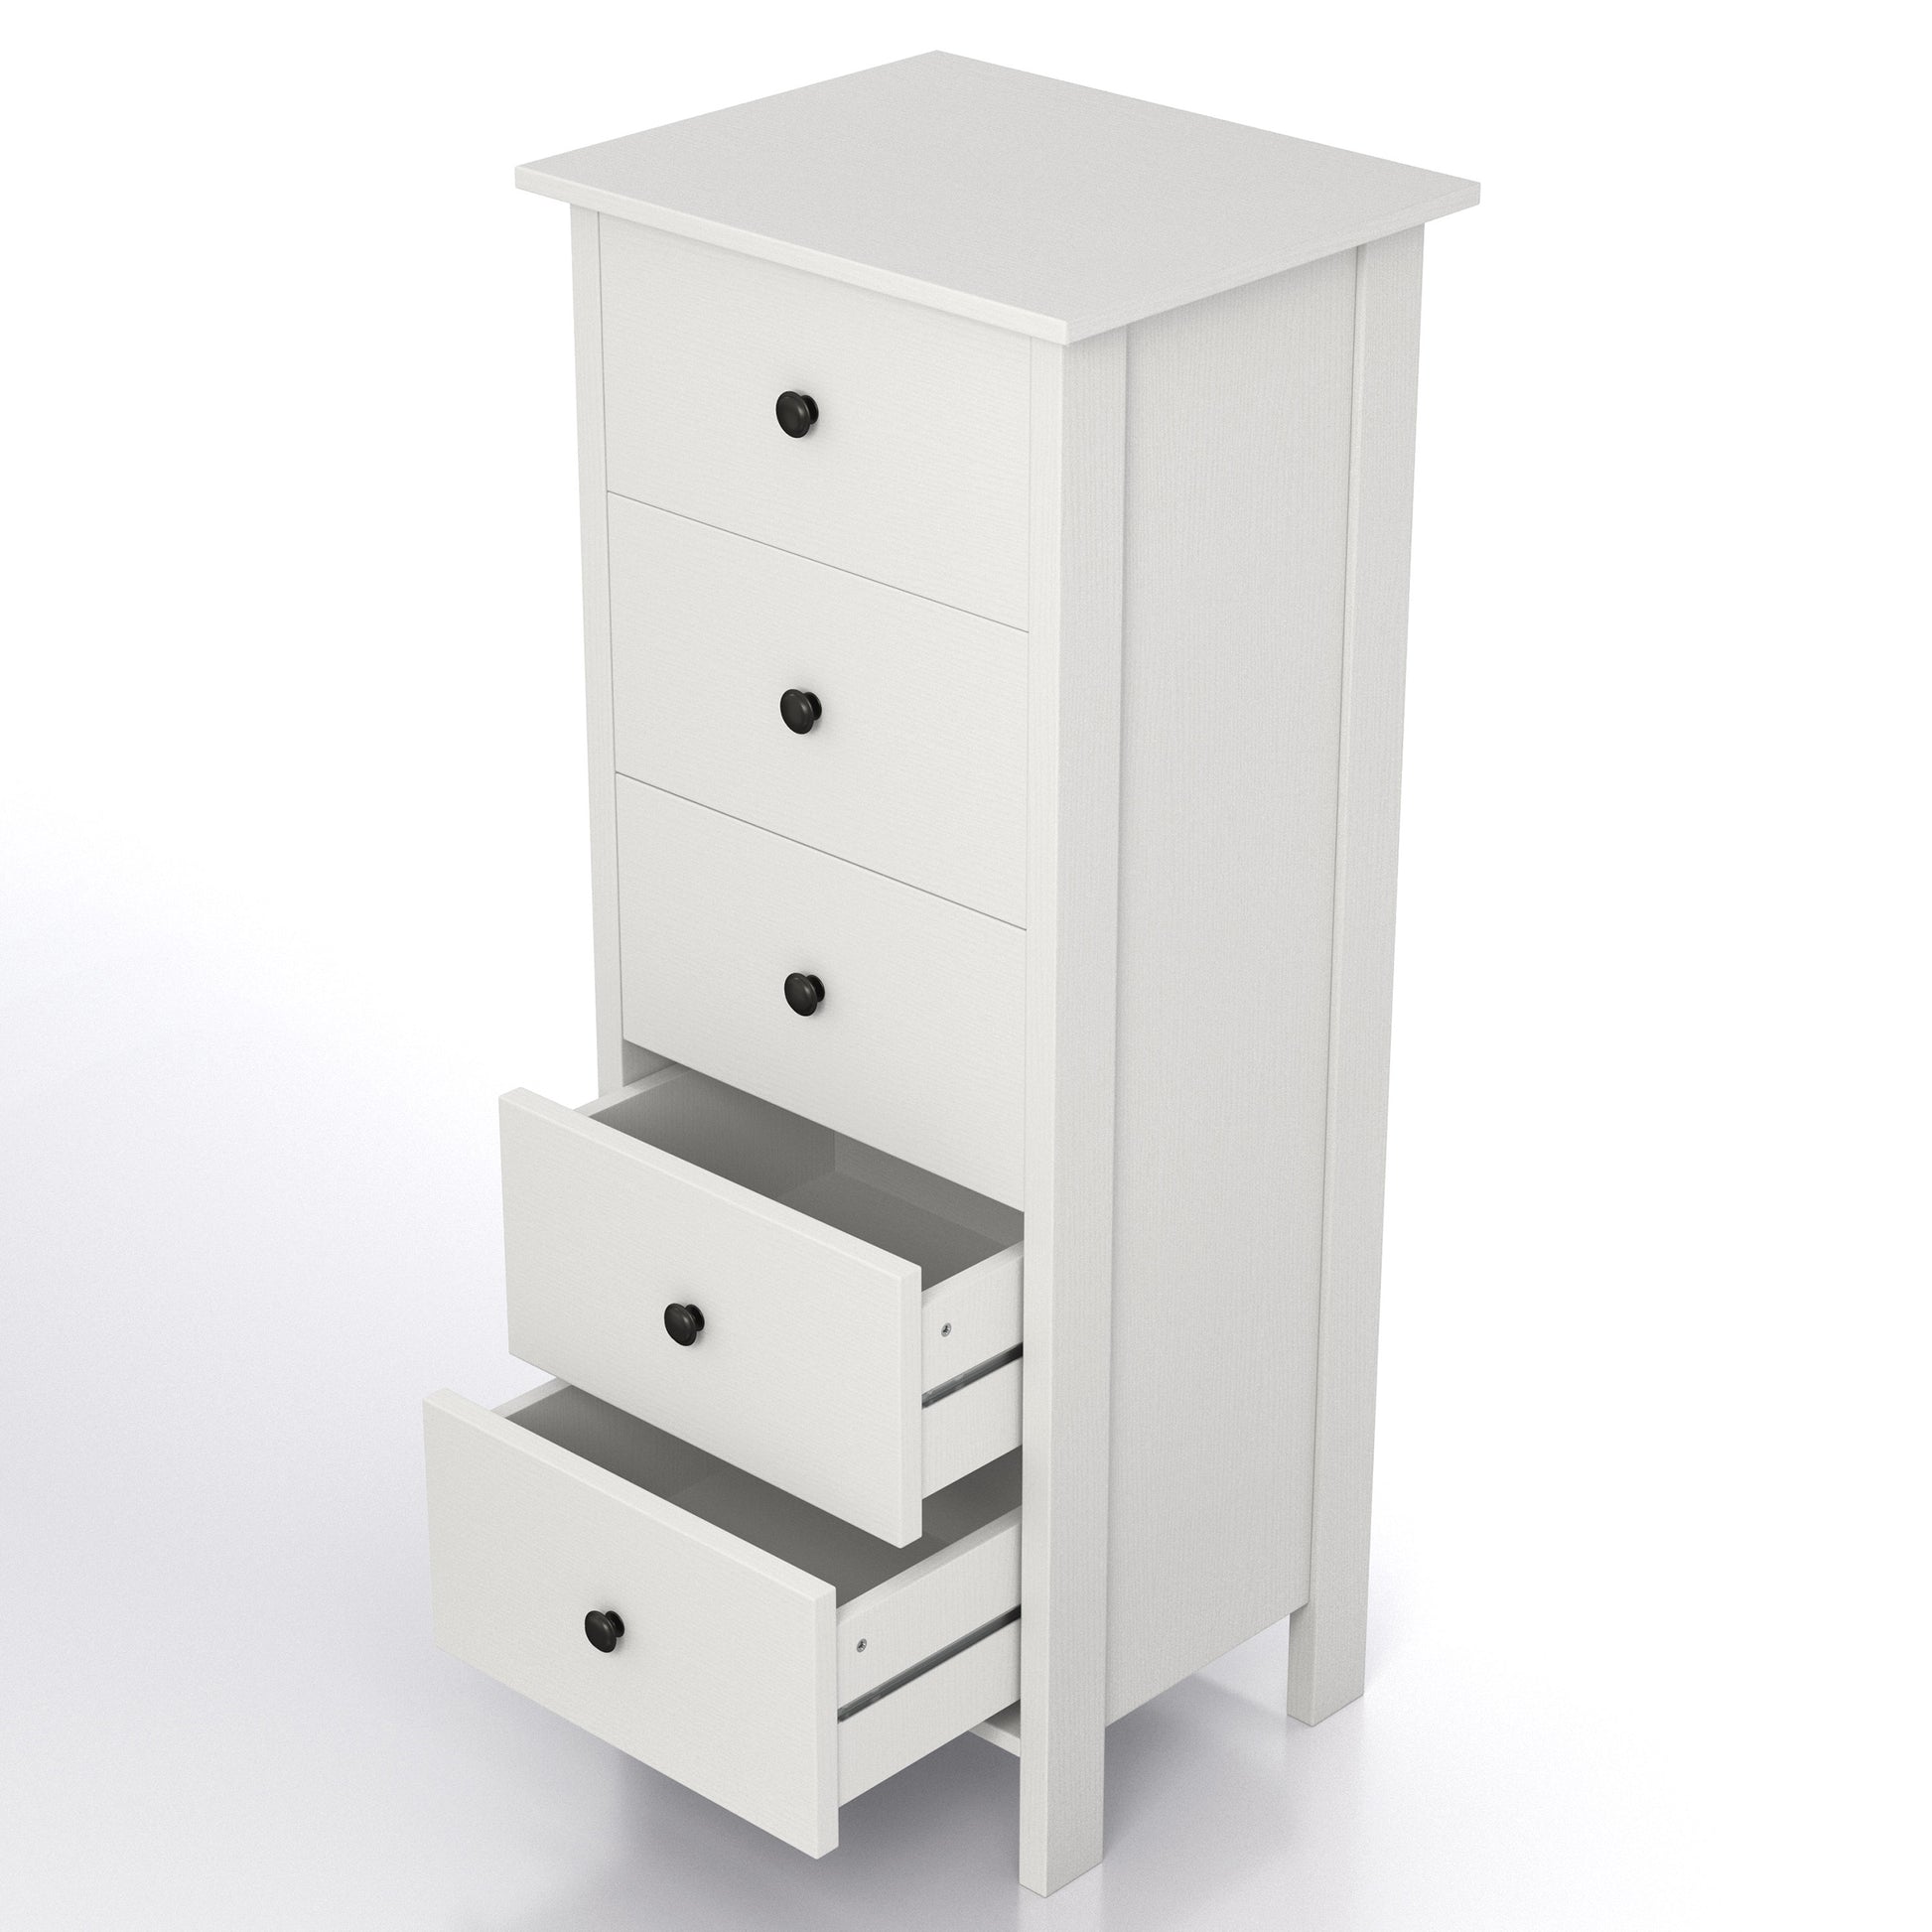 Left angled bird's eye view of a transitional white slim five-drawer chest with two drawers open on a white background